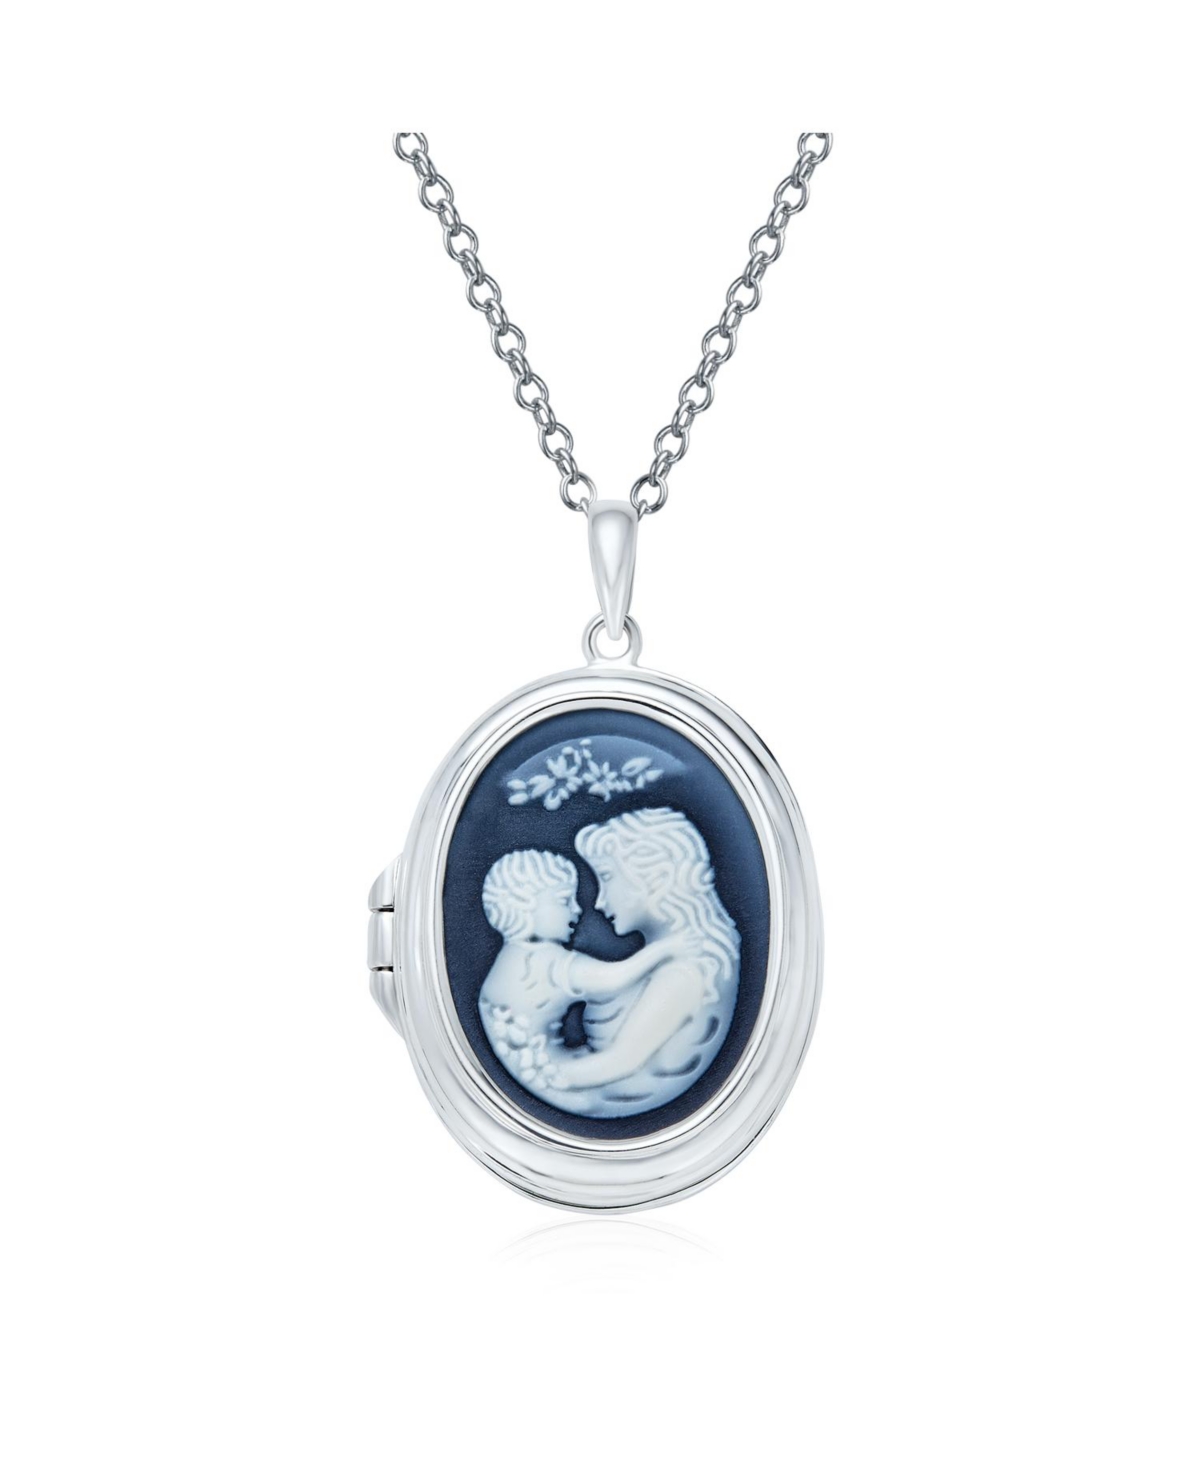 Victorian Style Blue White Carved Loving Family Mother and Child Cameo Photo Locket Pendant Son Daughter Necklace Sterling Silver Women